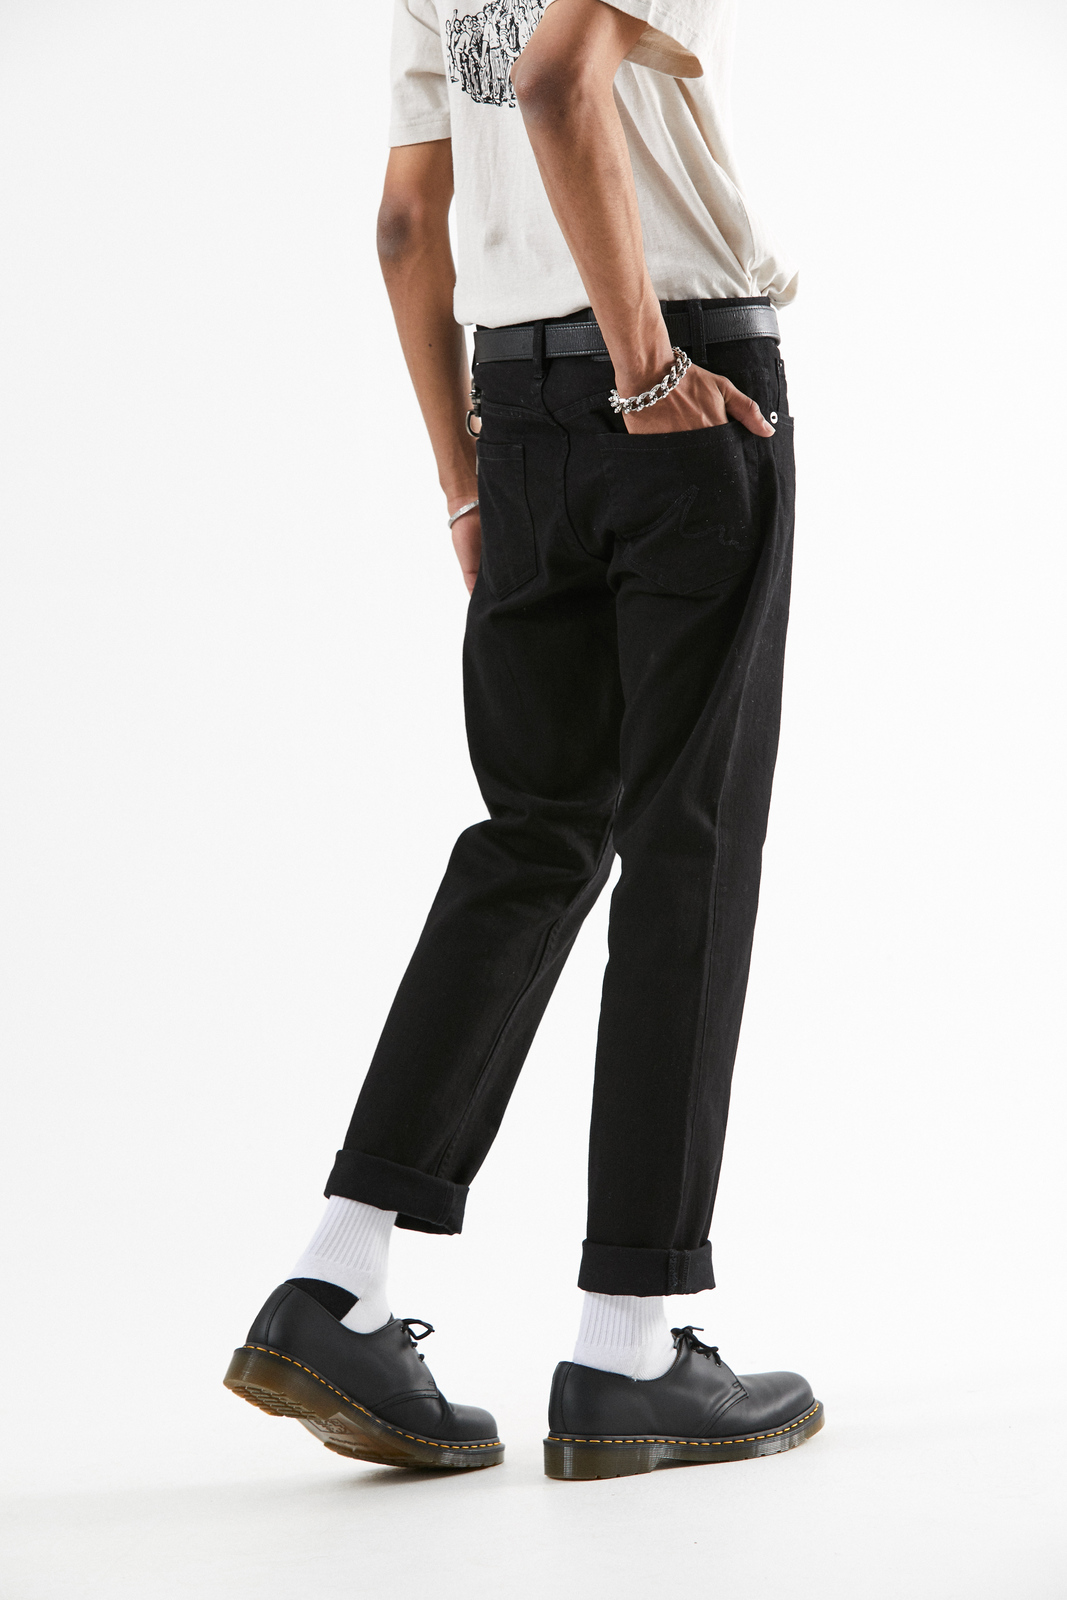 Afends - Ninety Twos - Hemp Relaxed Fit Chino Pants | Made In Hemp